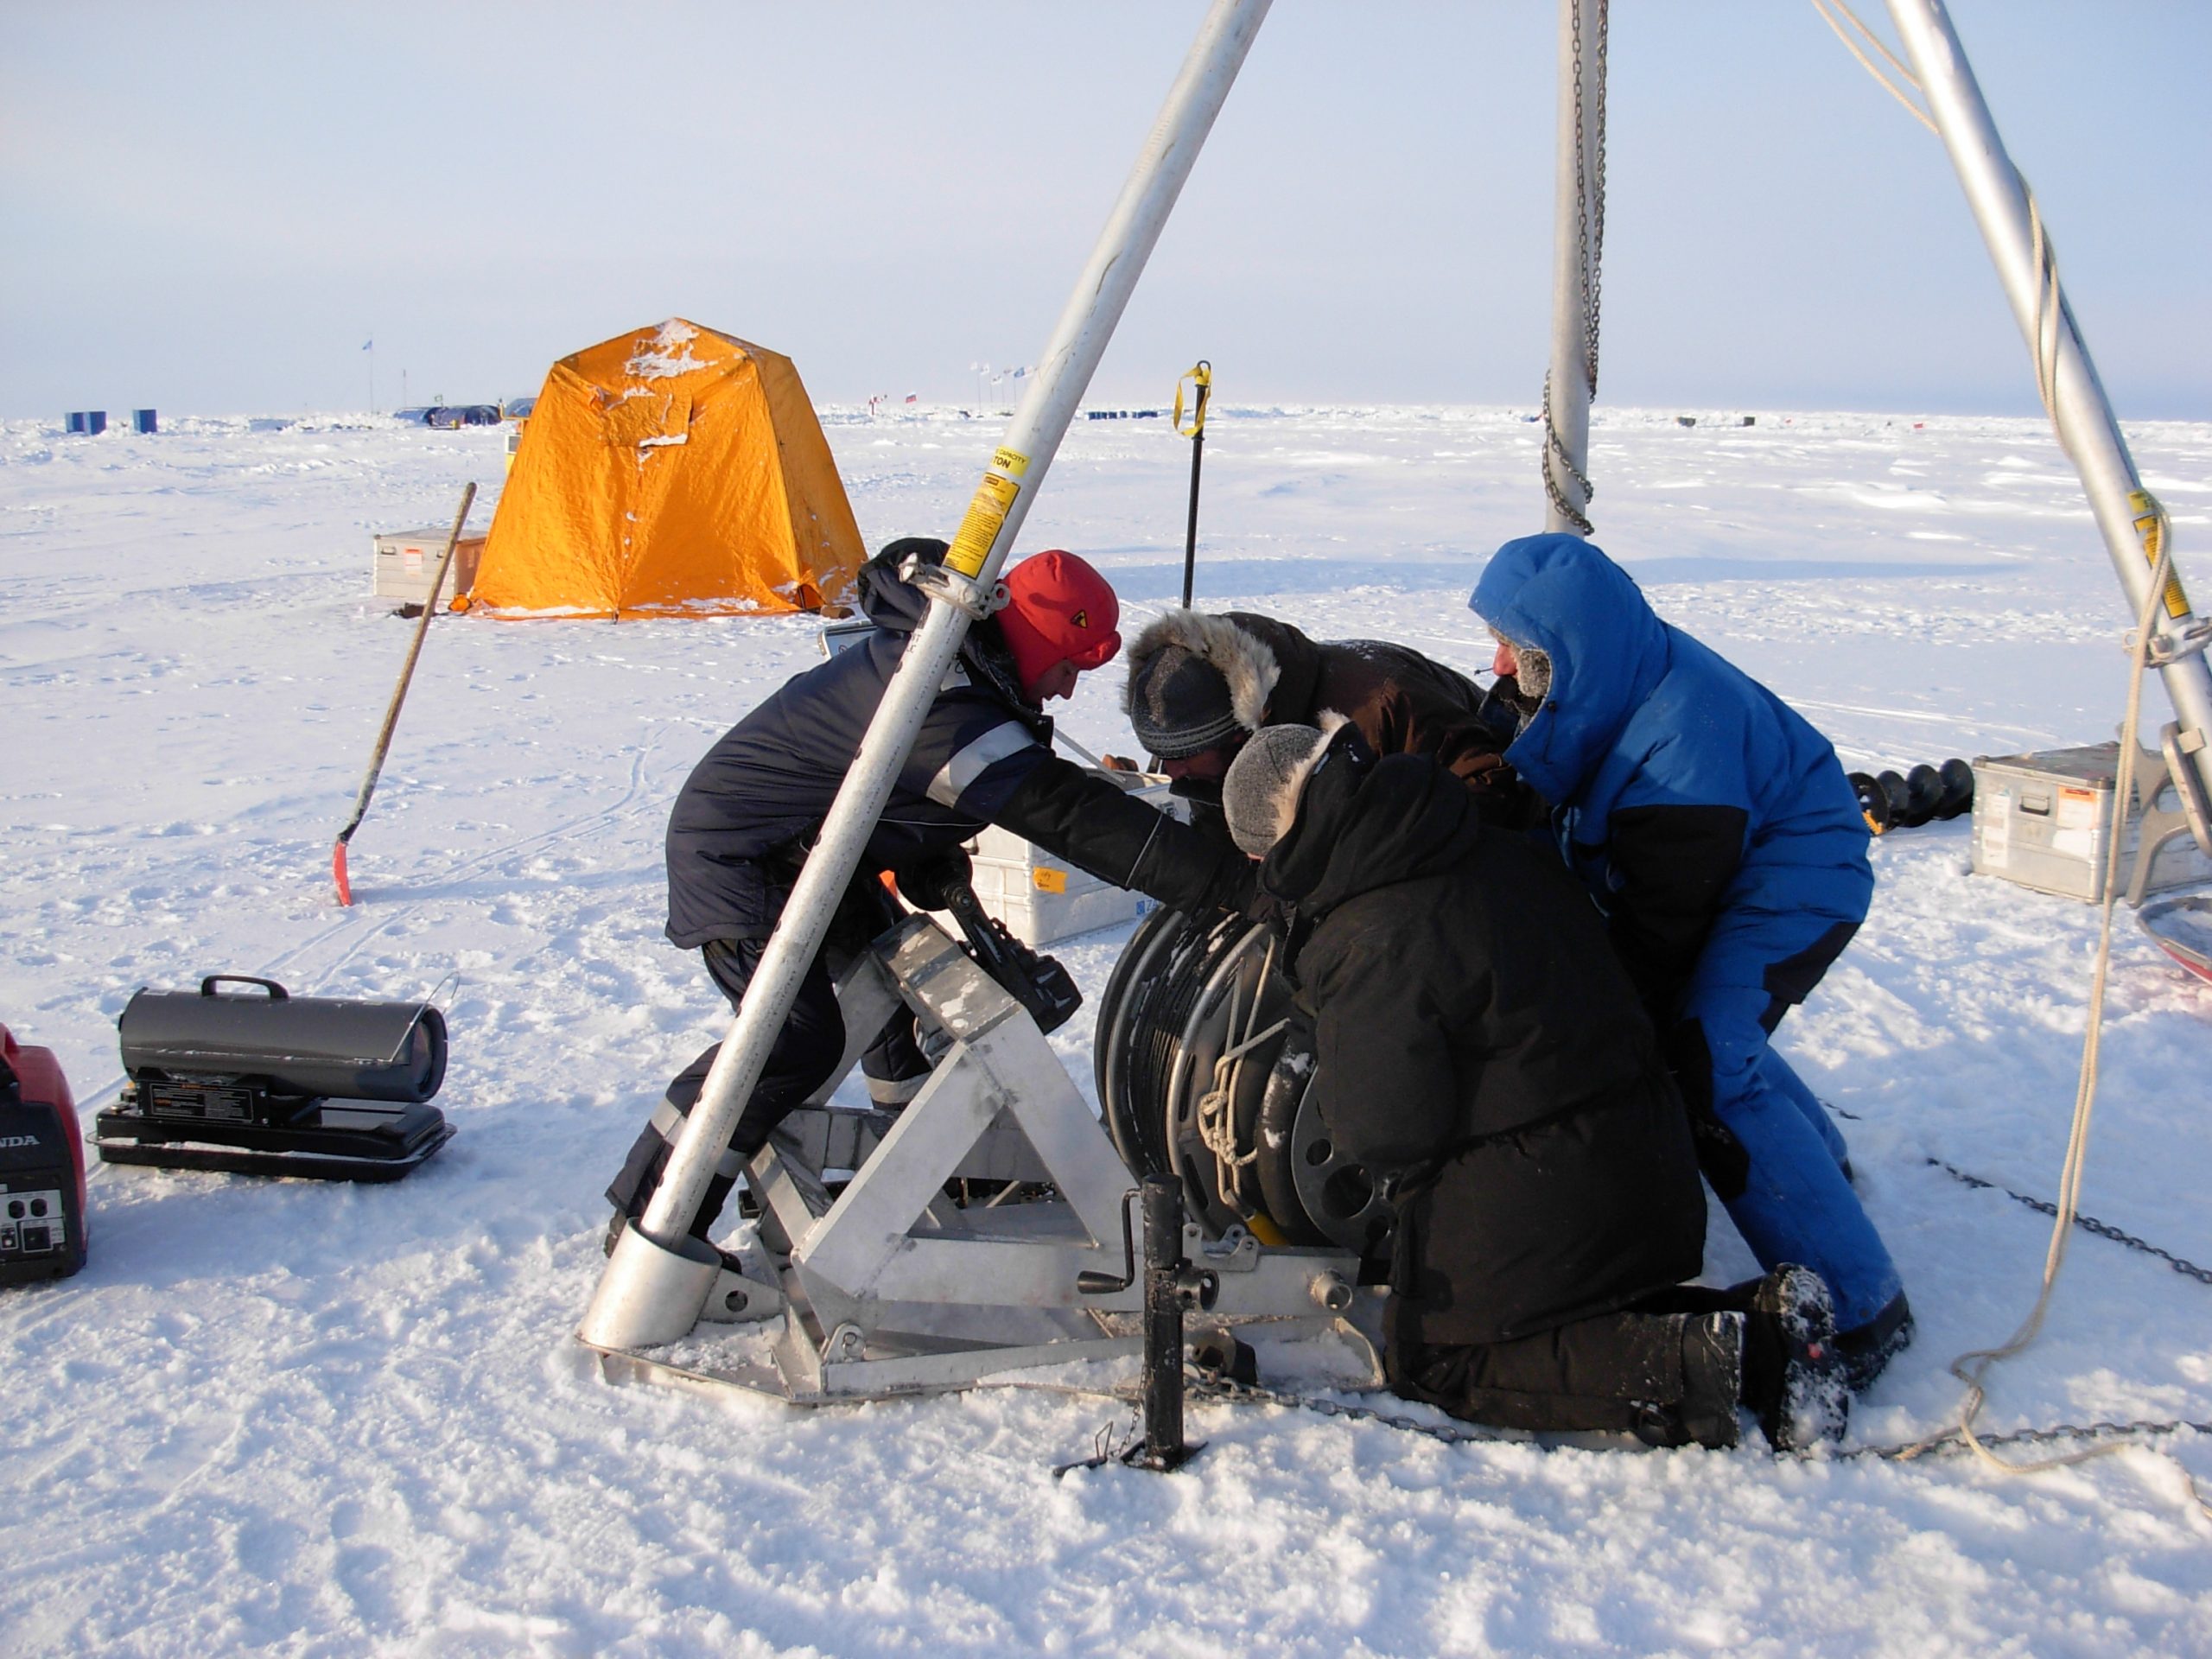 ITP wire being maneuvered onto deployment winch by Sergey Pisarev, Chris Basque, Jeff Pietro, and Denis Dausse.  Working tent and ice camp Barneo are in the background. (Photo by Rick Krishfield)